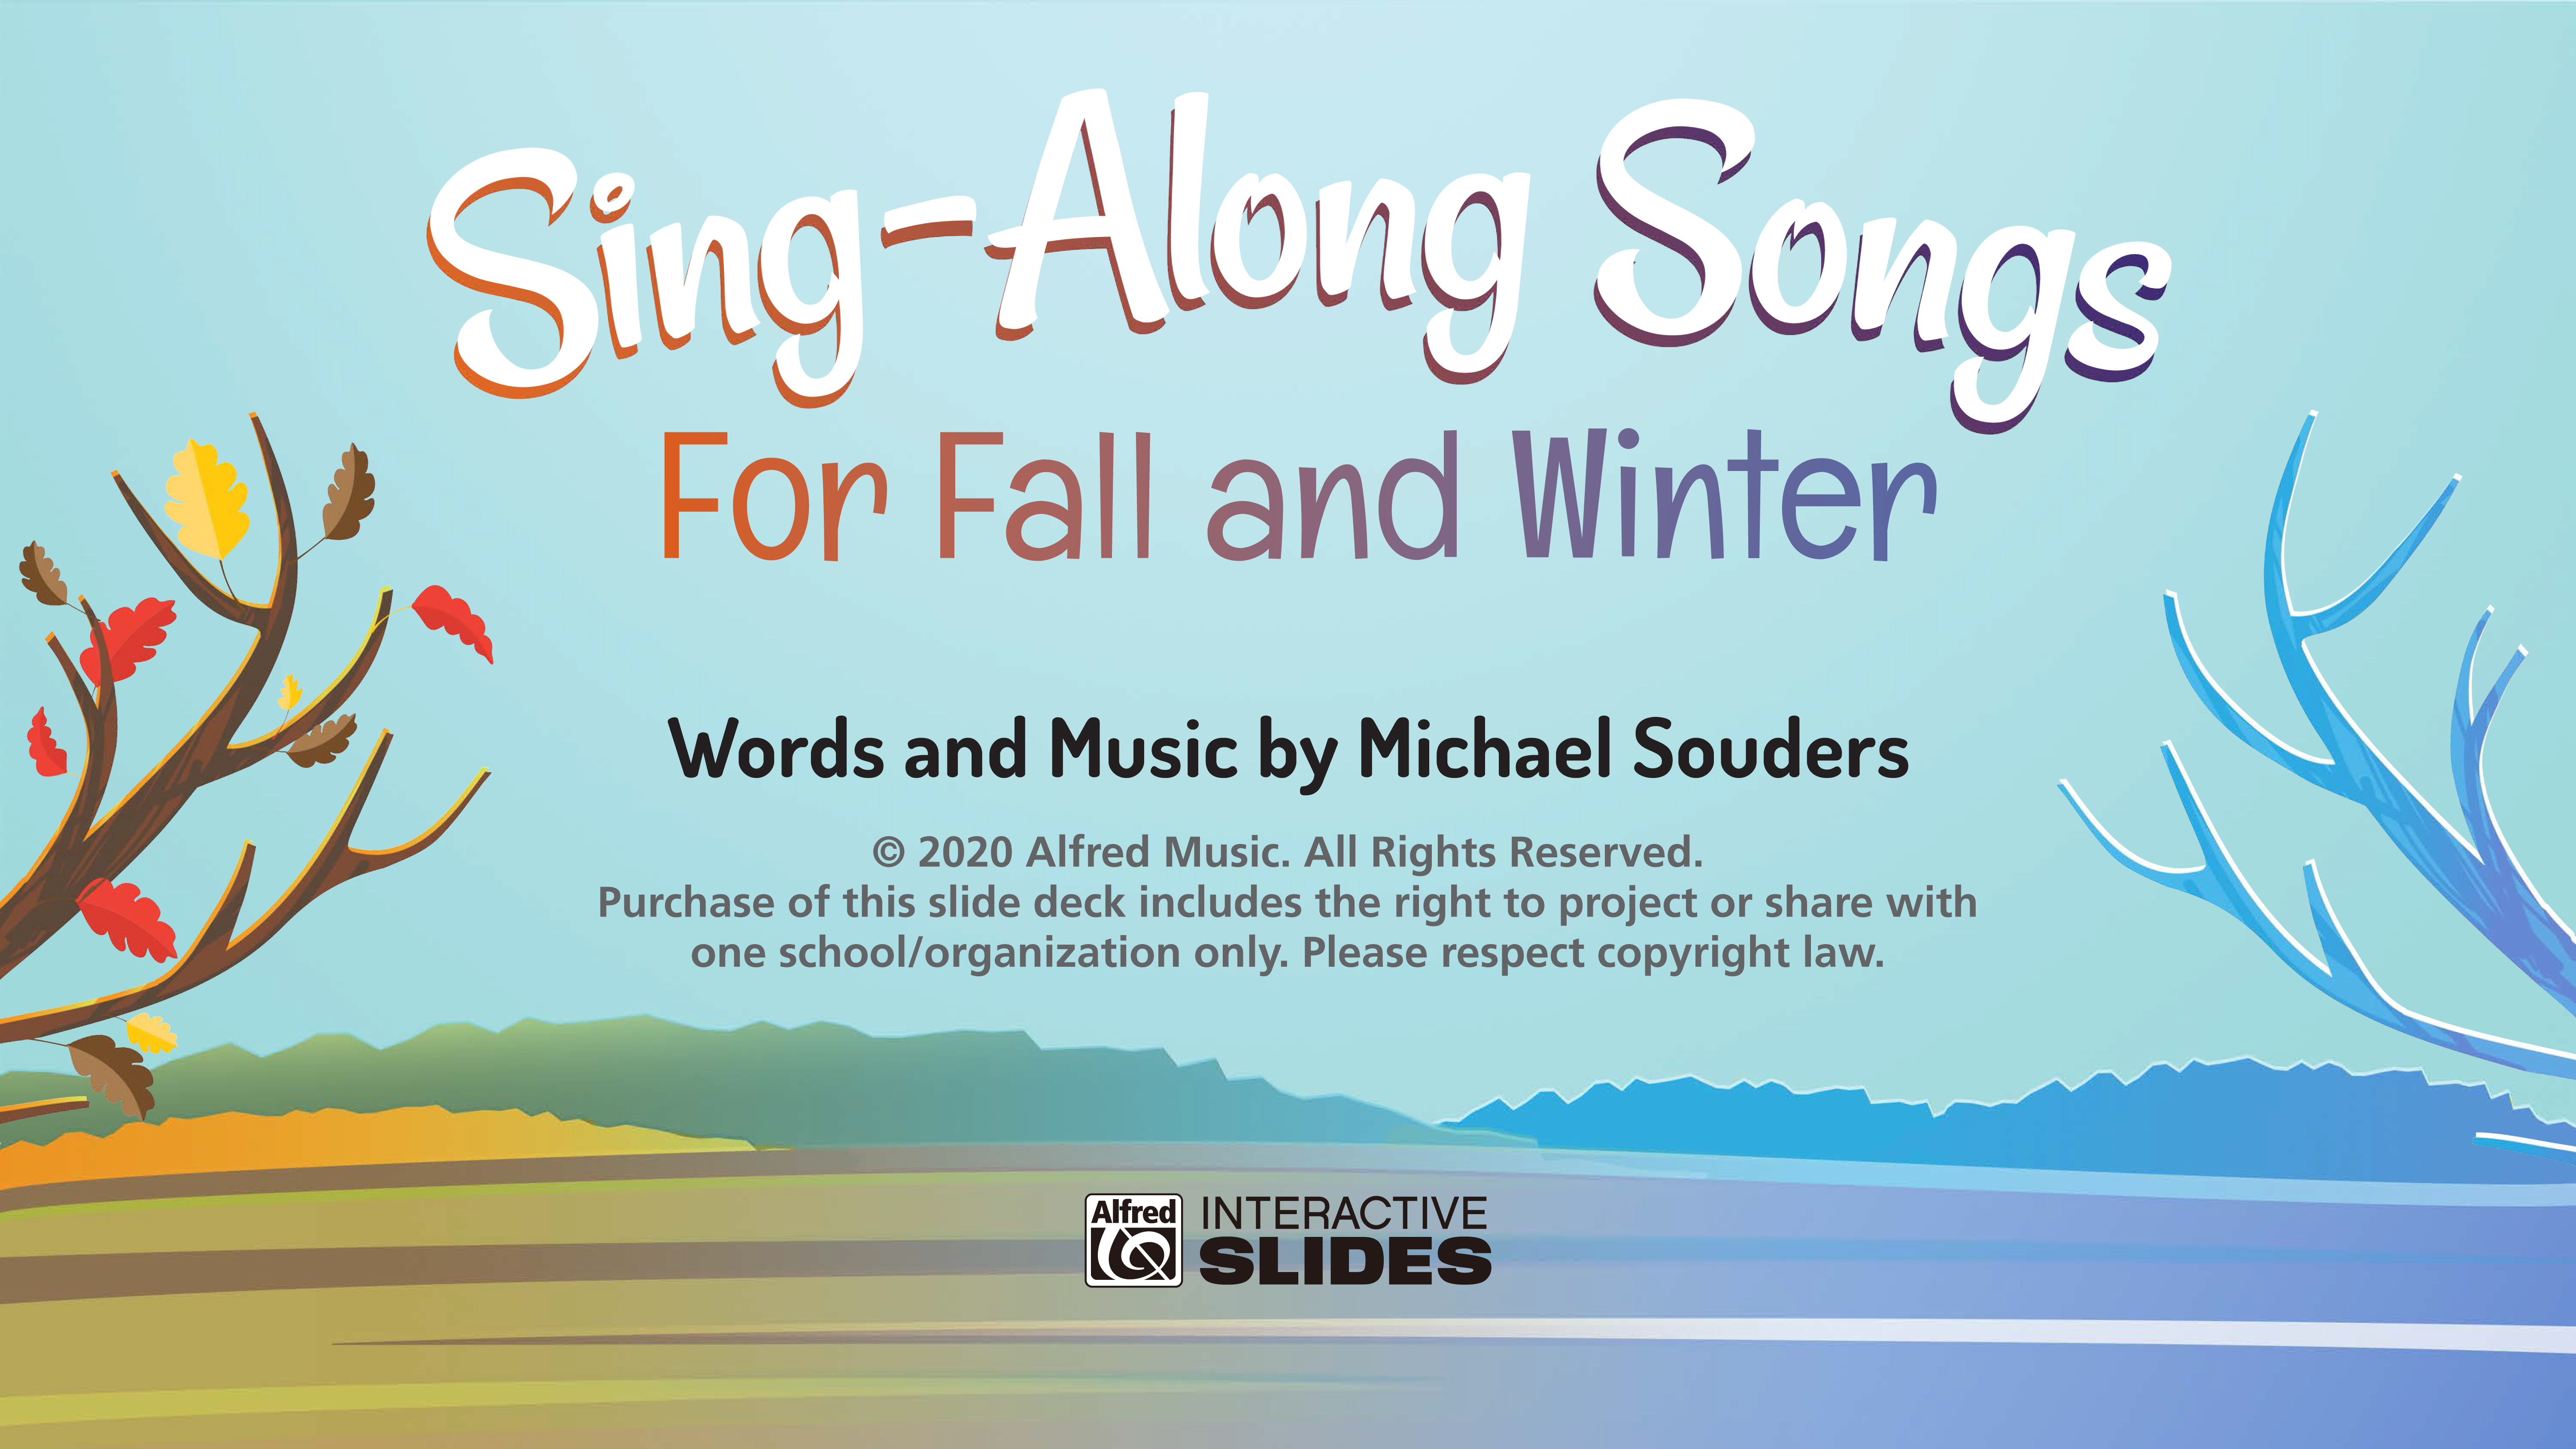 Sing-Along Slides for Fall and Winter